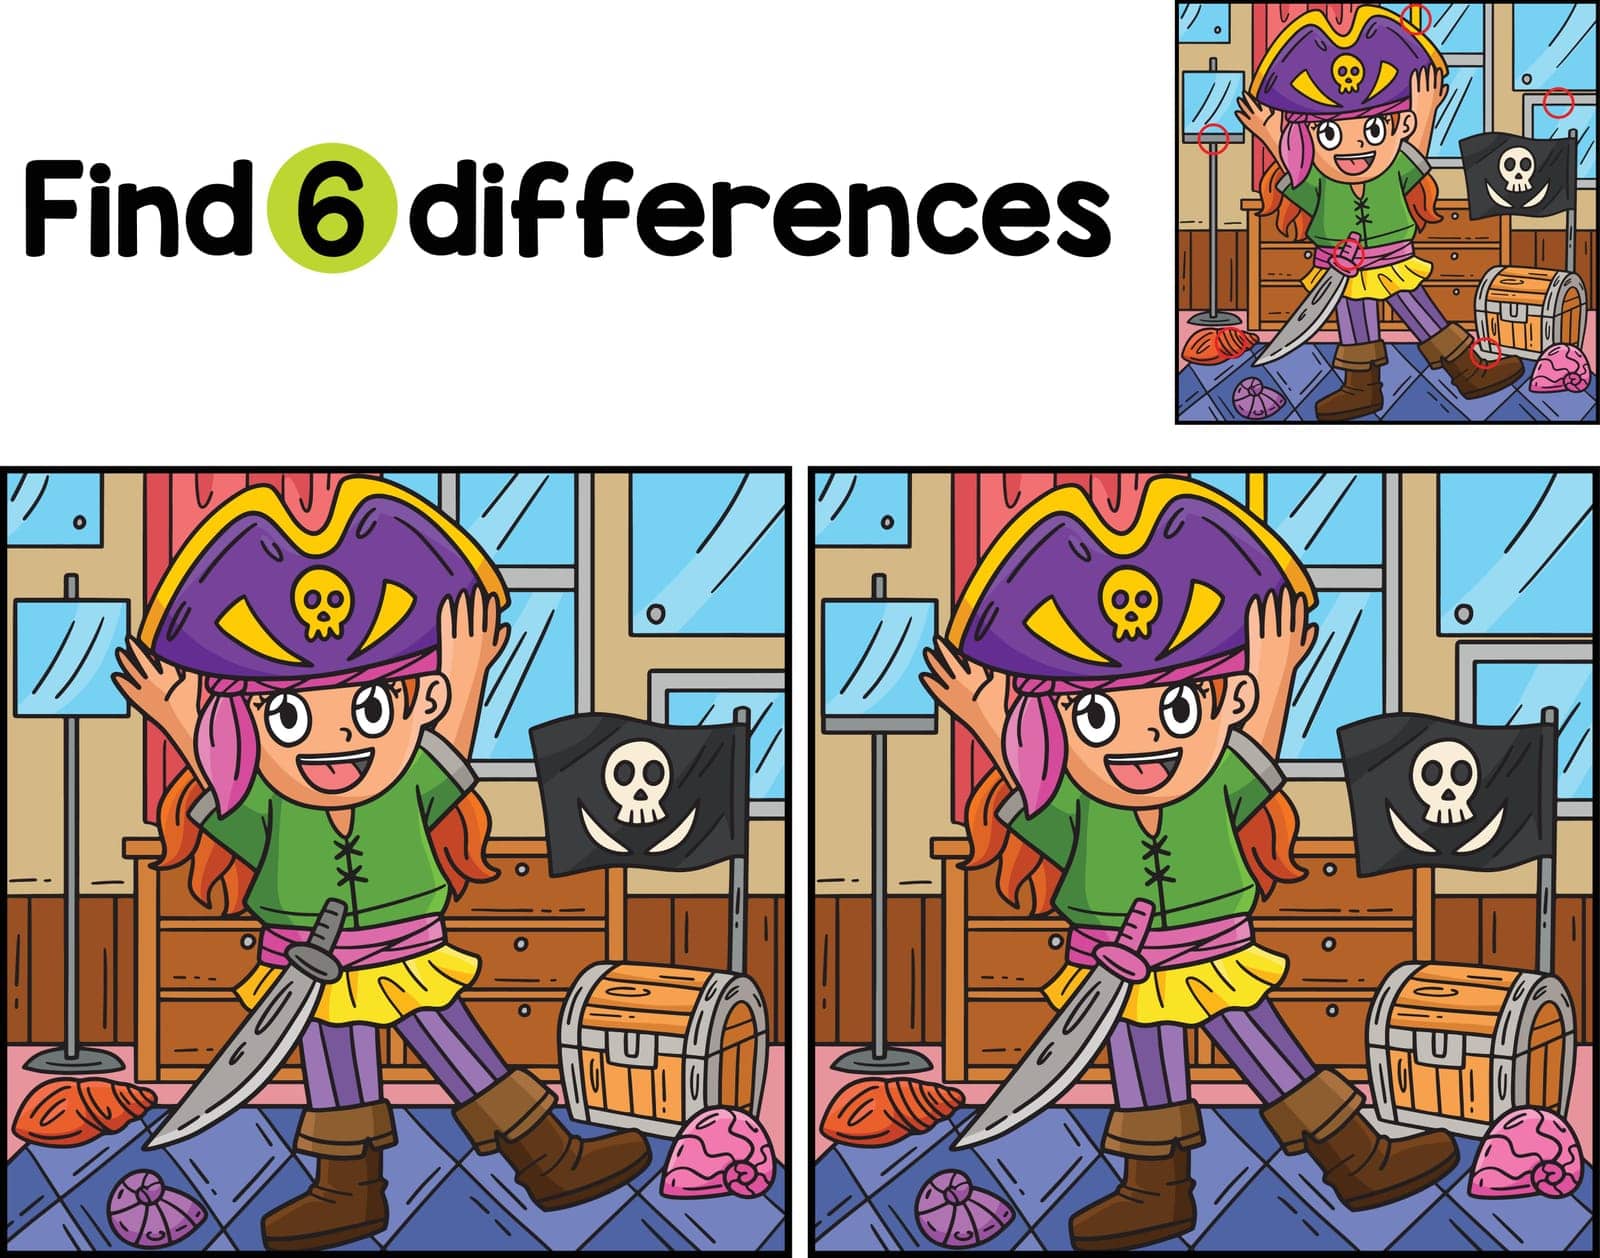 Find or spot the differences on this Girl Putting on a Pirate Hat kids activity page. A funny and educational puzzle-matching game for children.